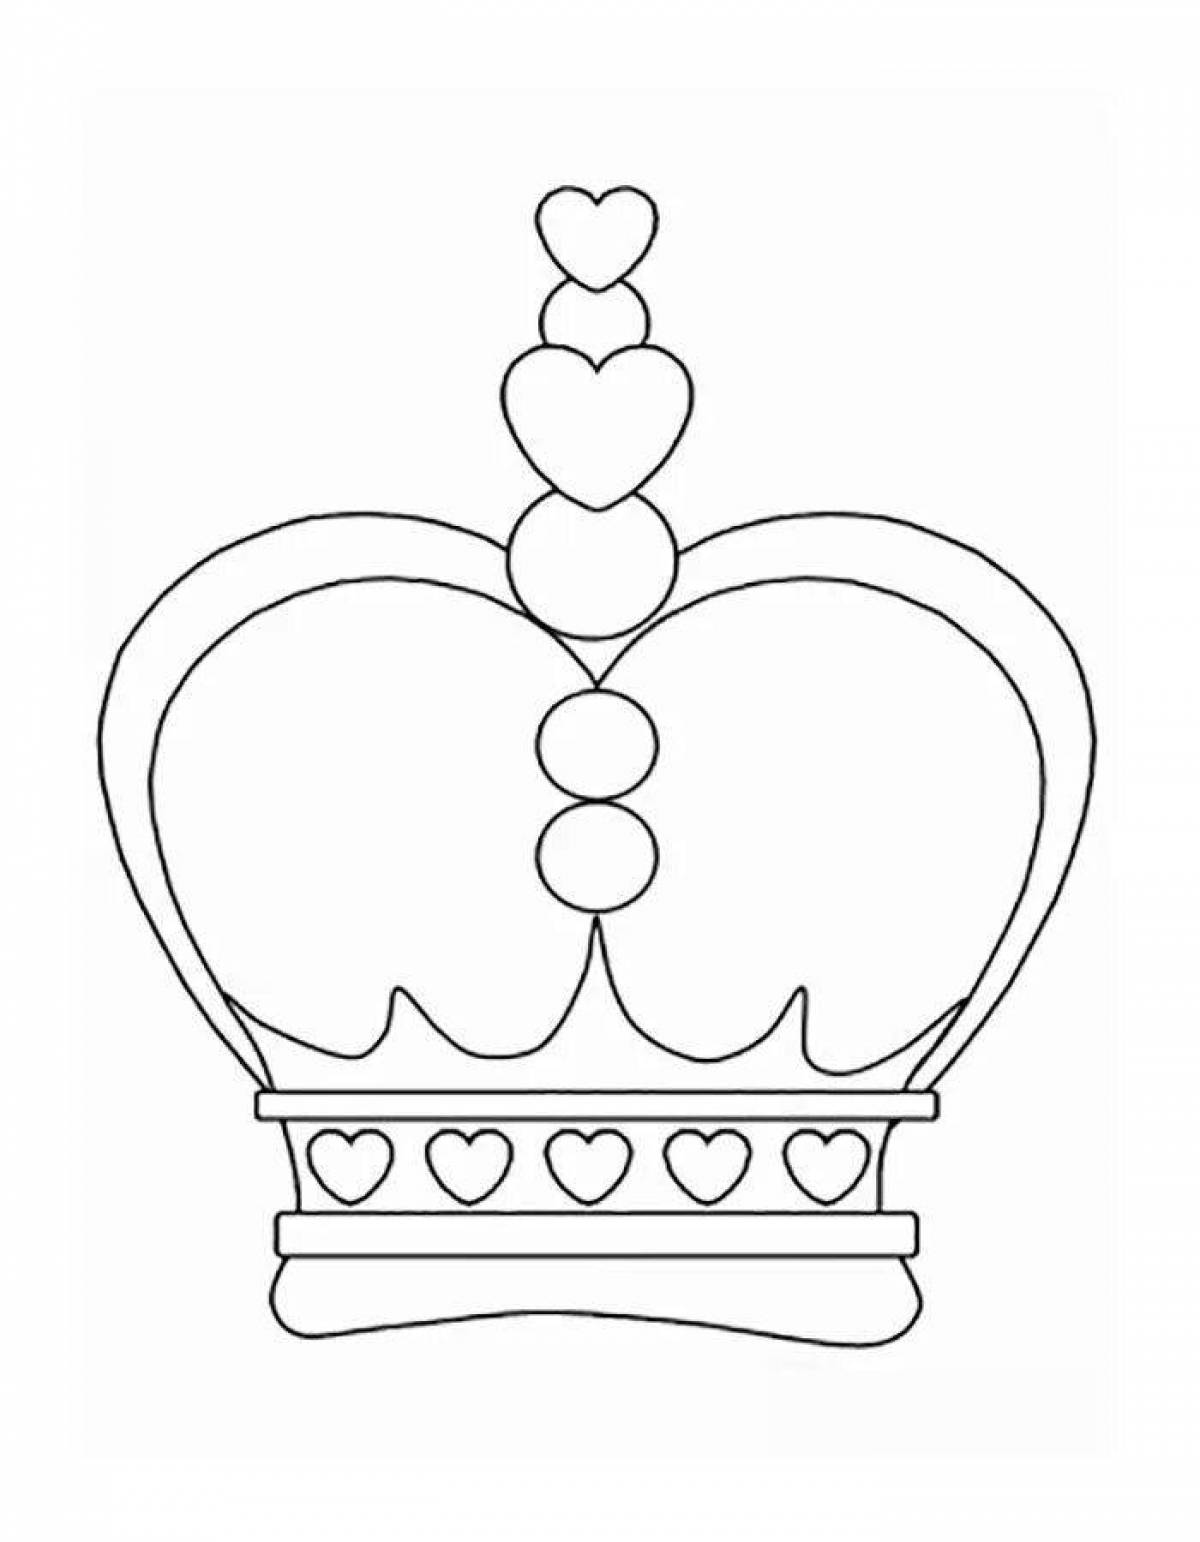 Adorable crown coloring page for kids